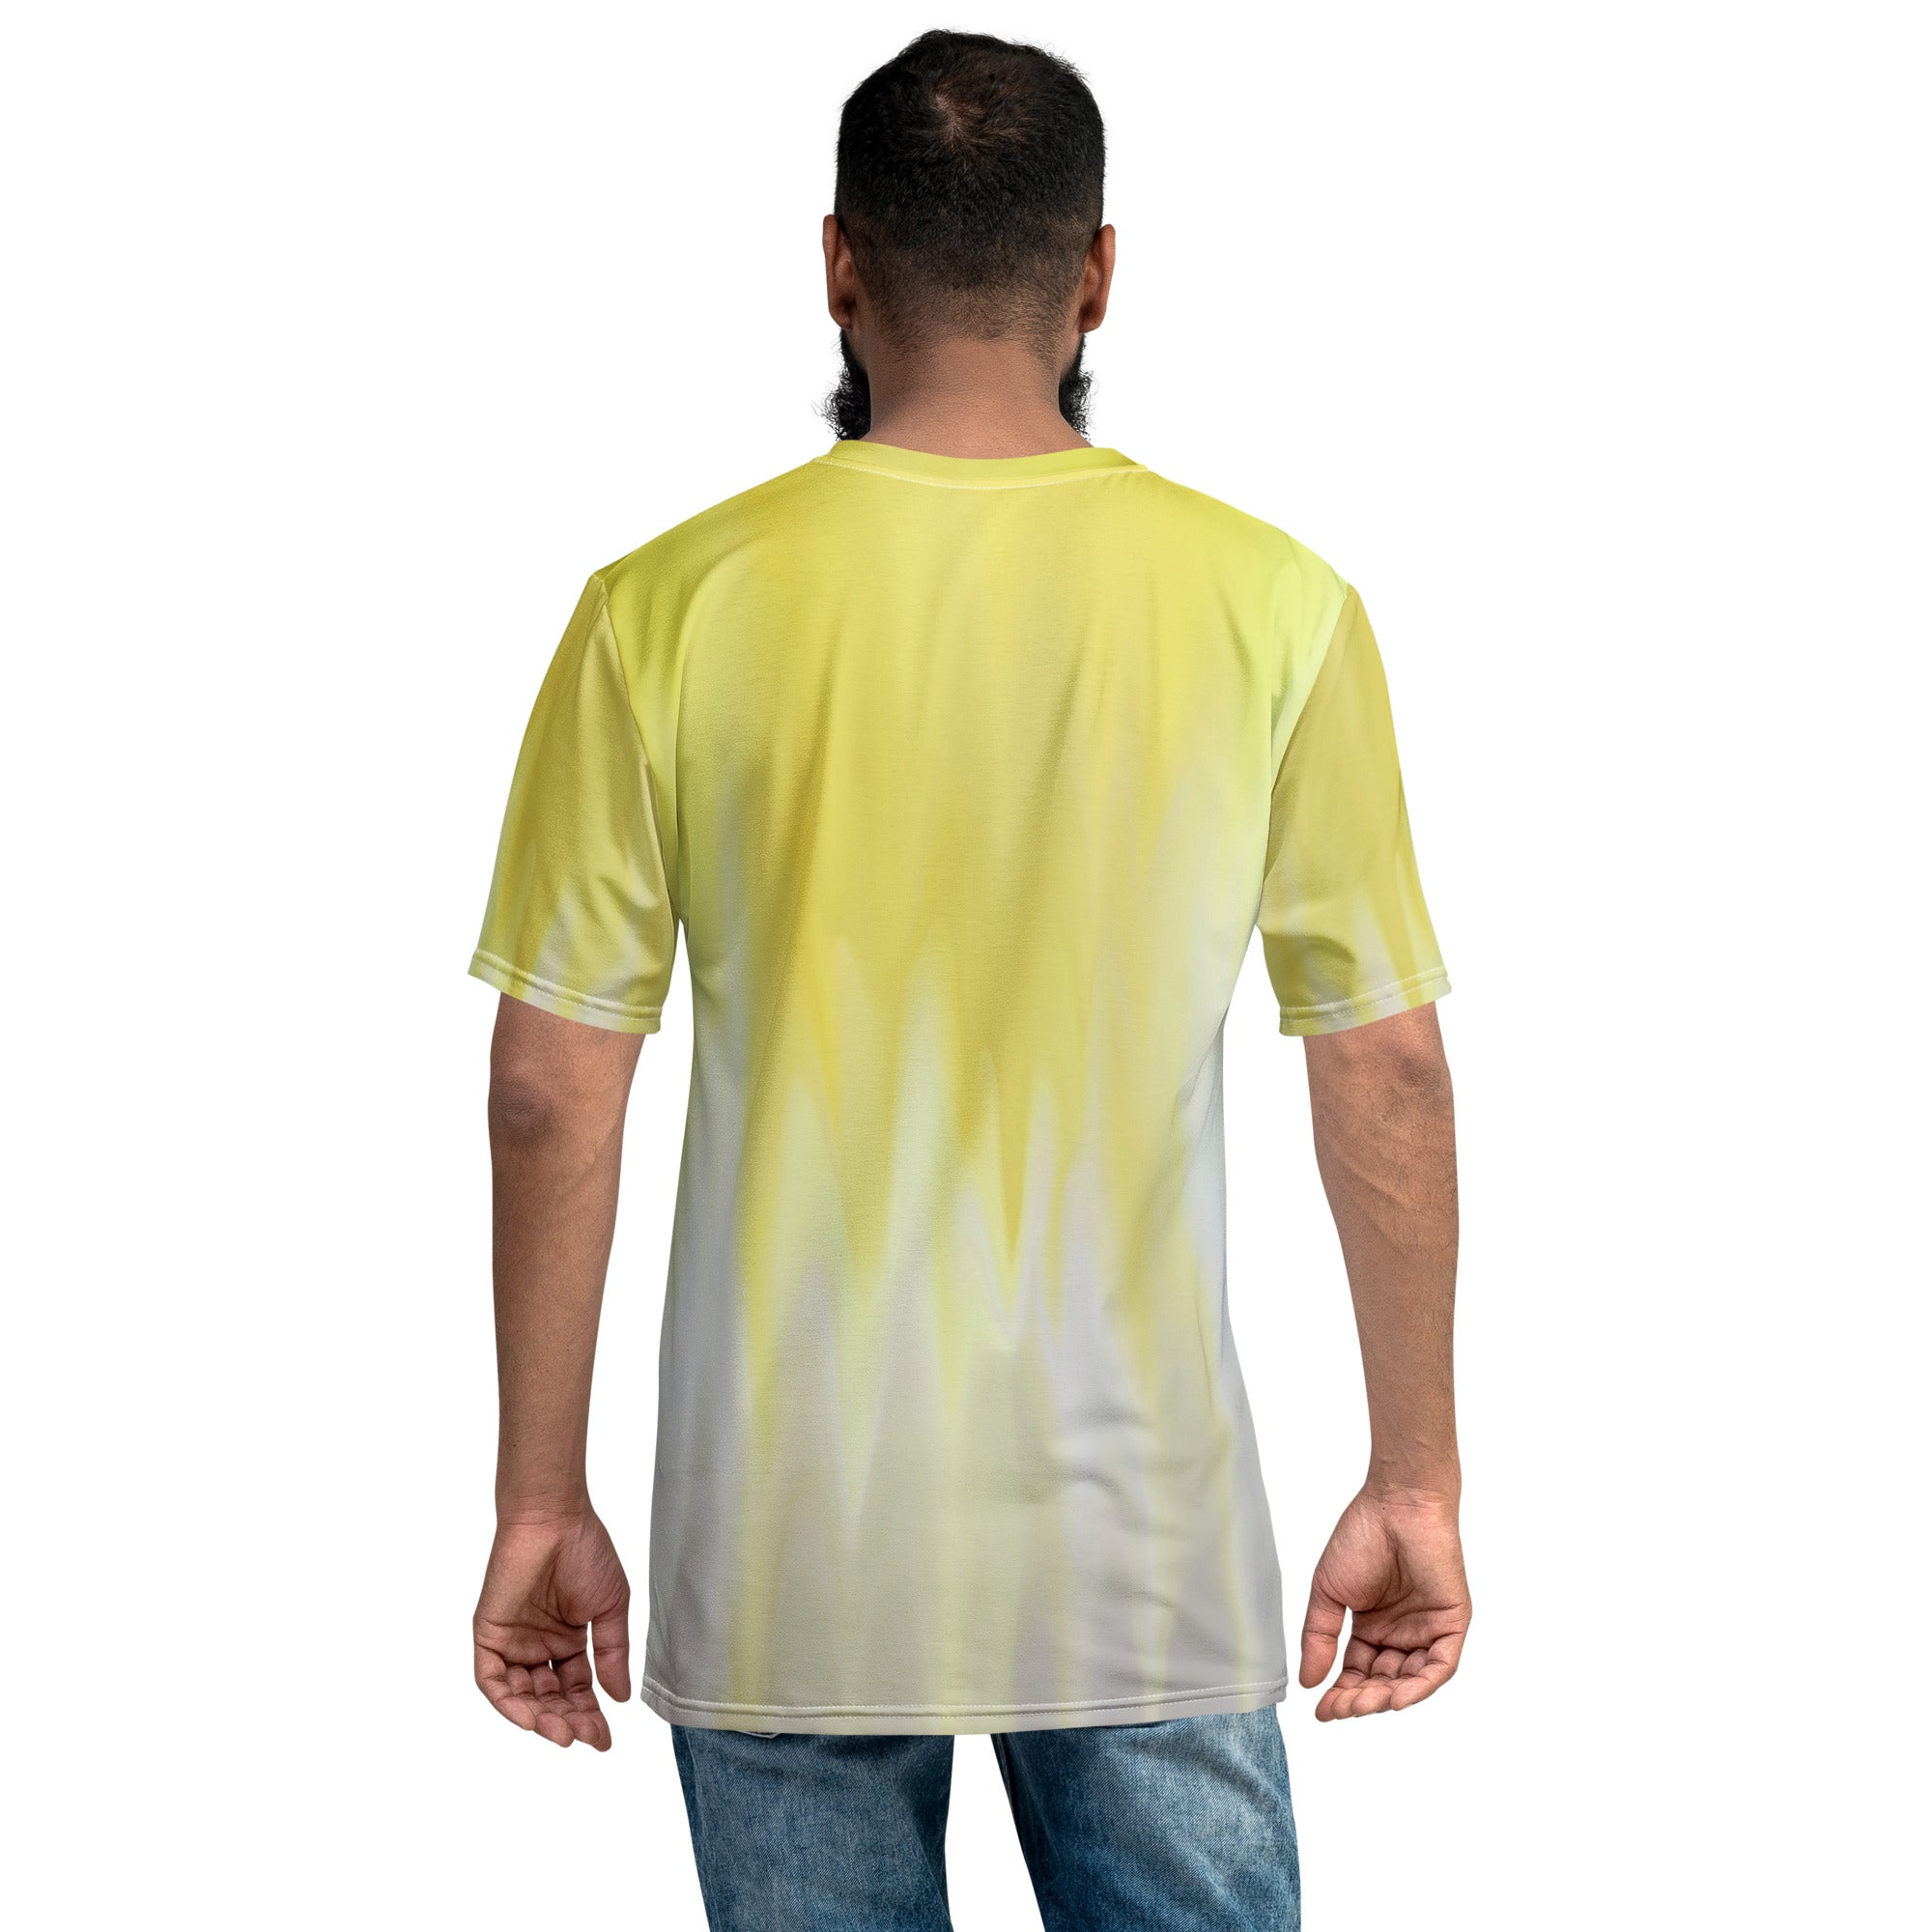 Back view of Radiant Petals Men's Crewneck Tee showing the vibrant pattern